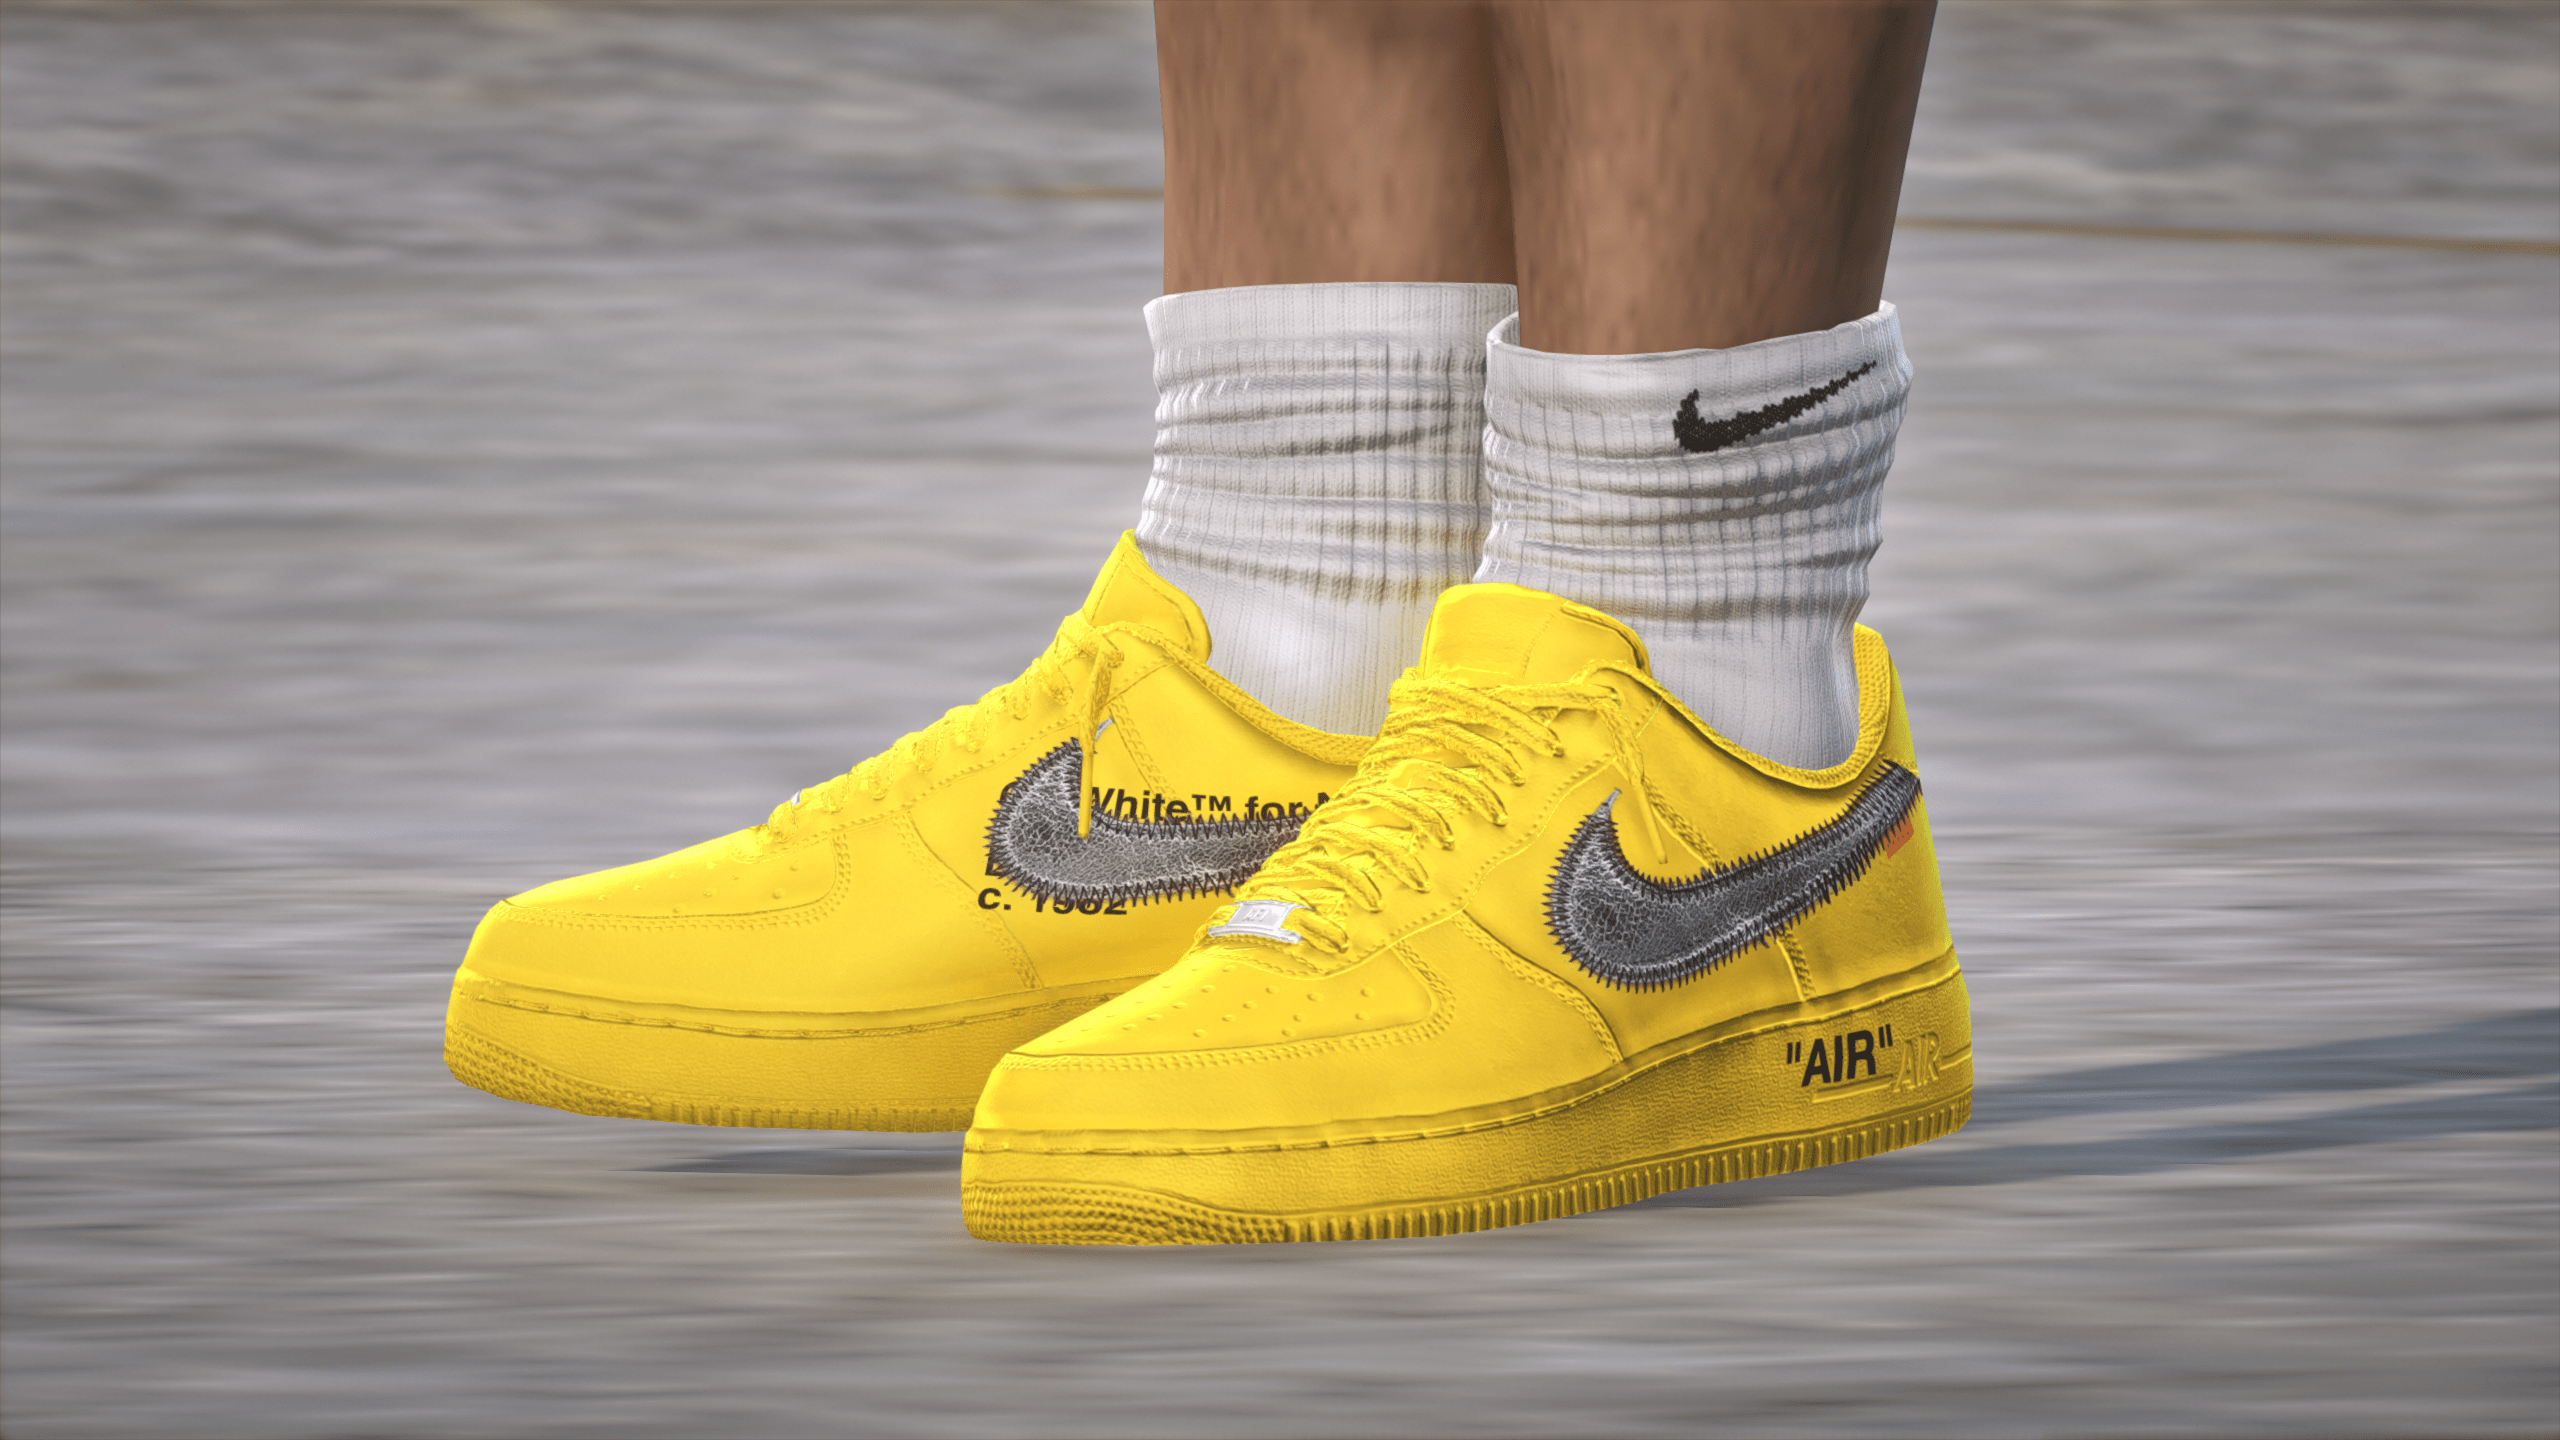 Nike Air Force 1 Low Off-White MCA University Blue for MP Male